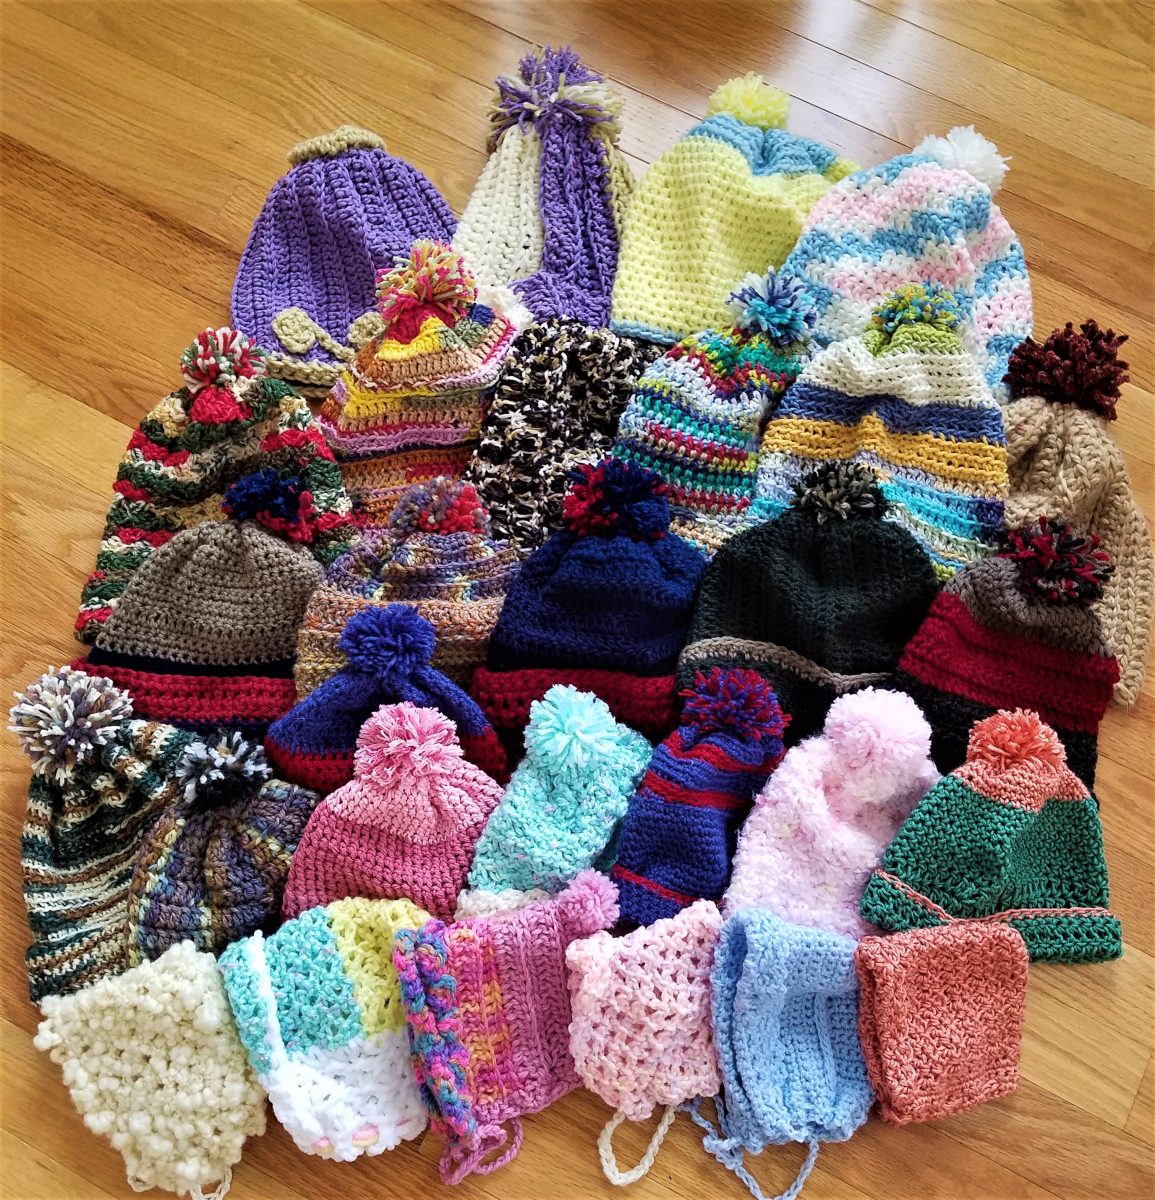 Fun Crocheting Projects